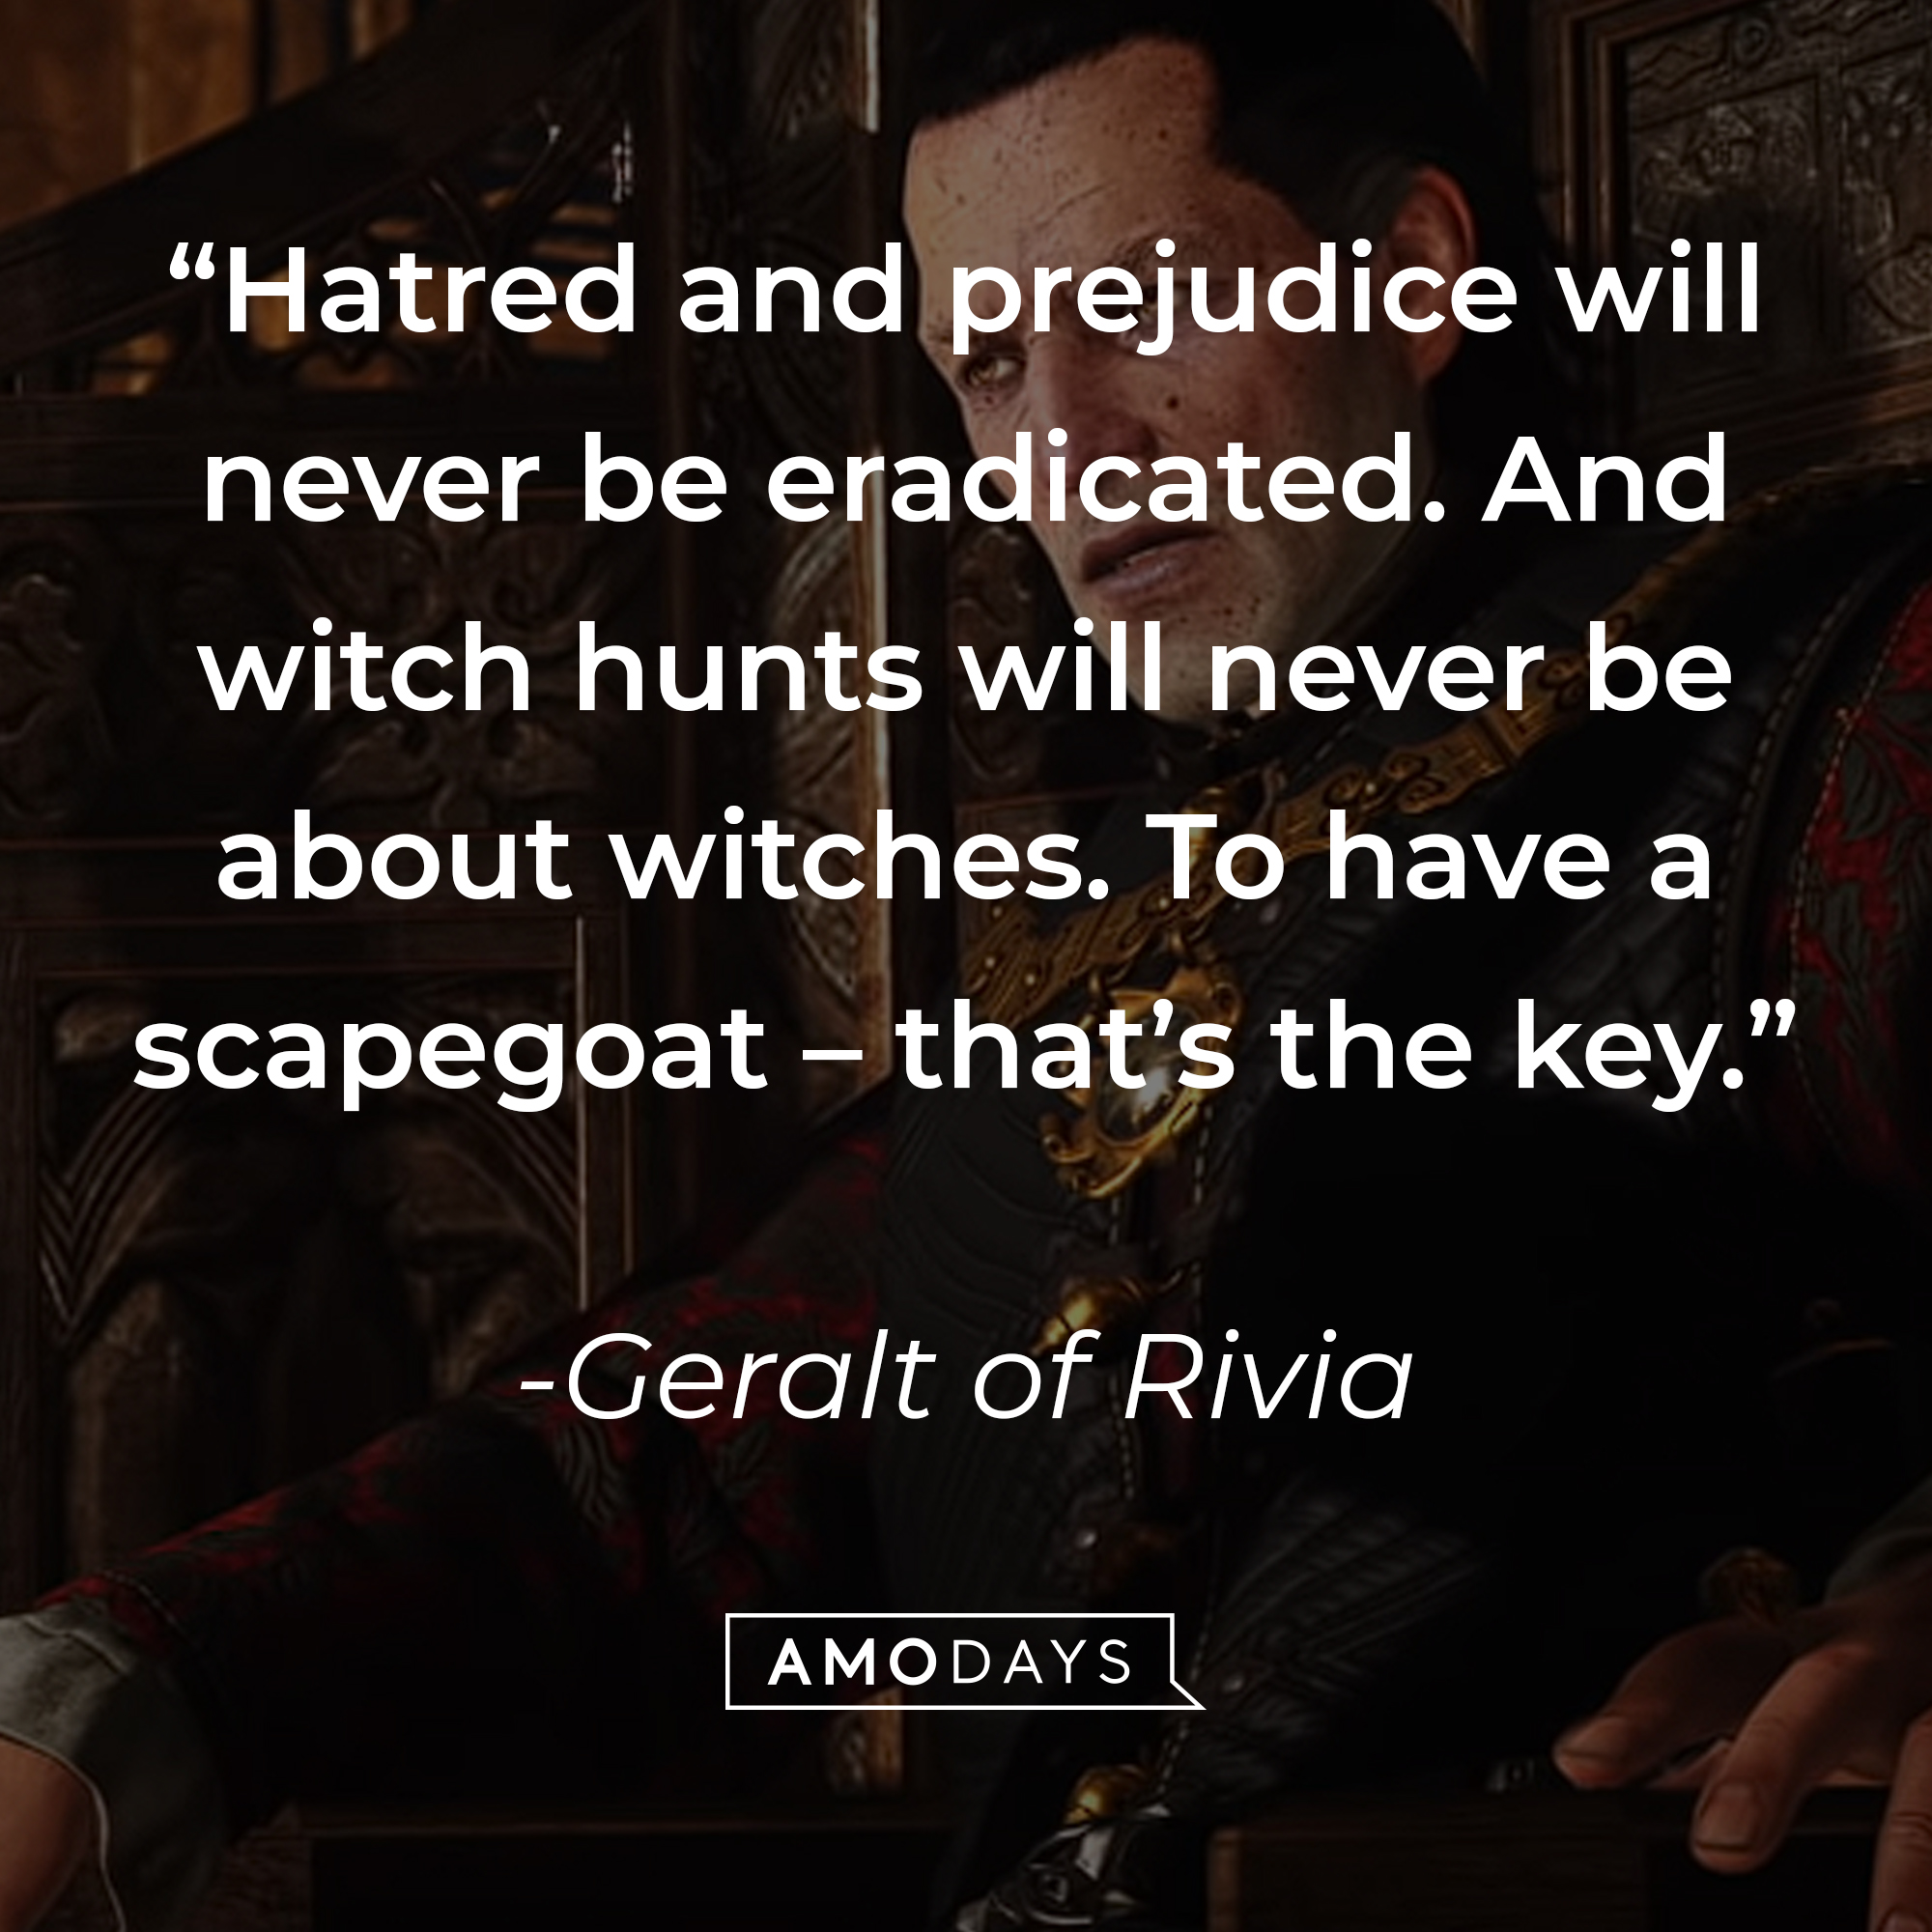 Geralt of Rivia's quote: "Hatred and prejudice will never be eradicated. And witch hunts will never be about witches. To have a scapegoat – that’s the key." | Source: youtube.com/CDPRED